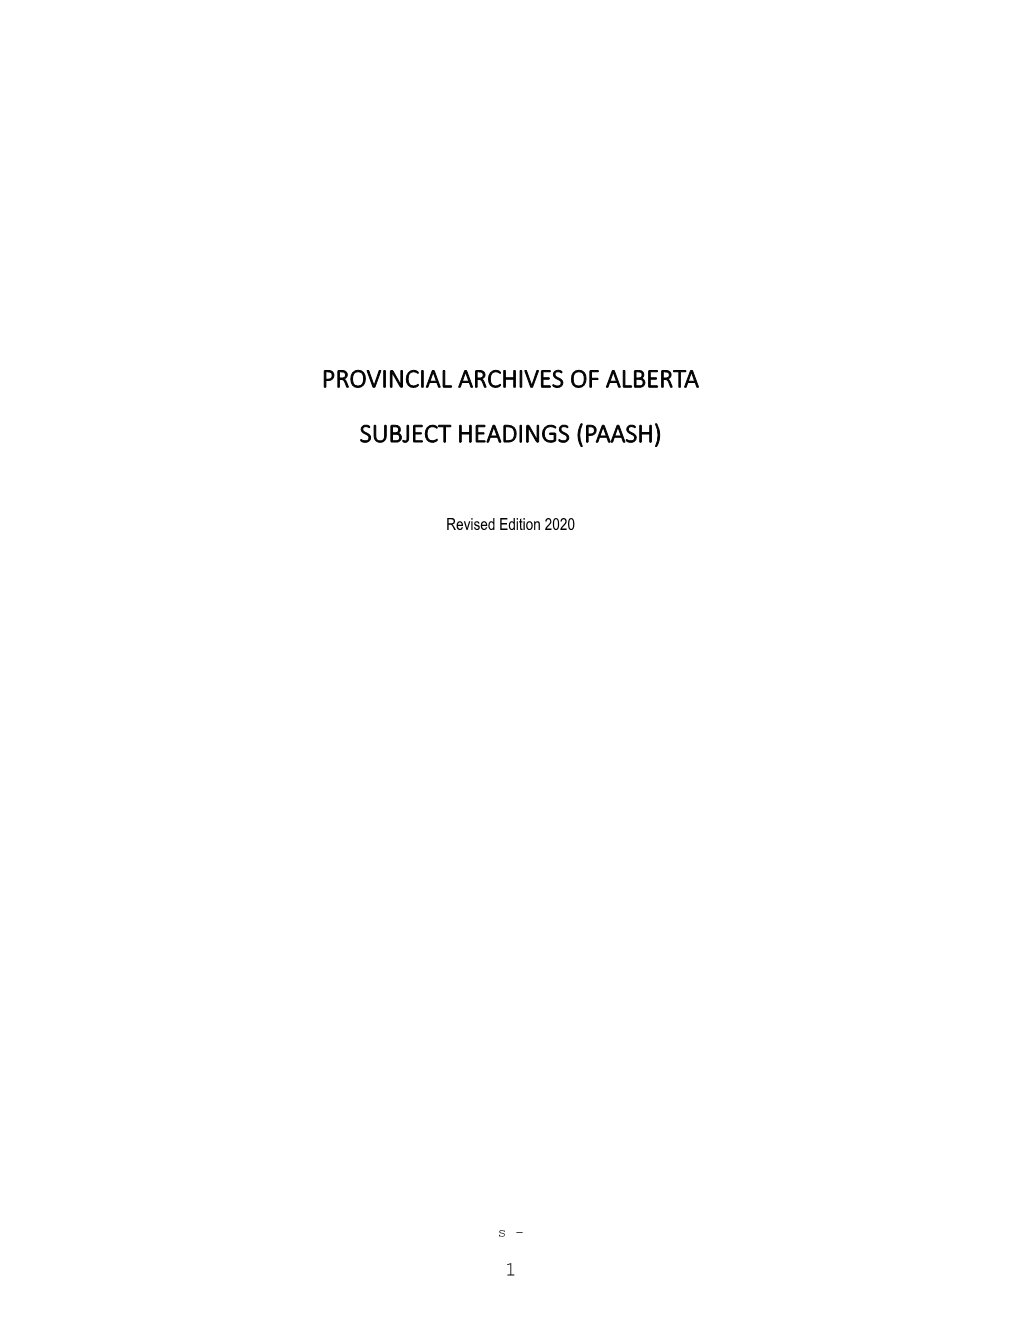 Provincial Archives of Alberta Subject Headings